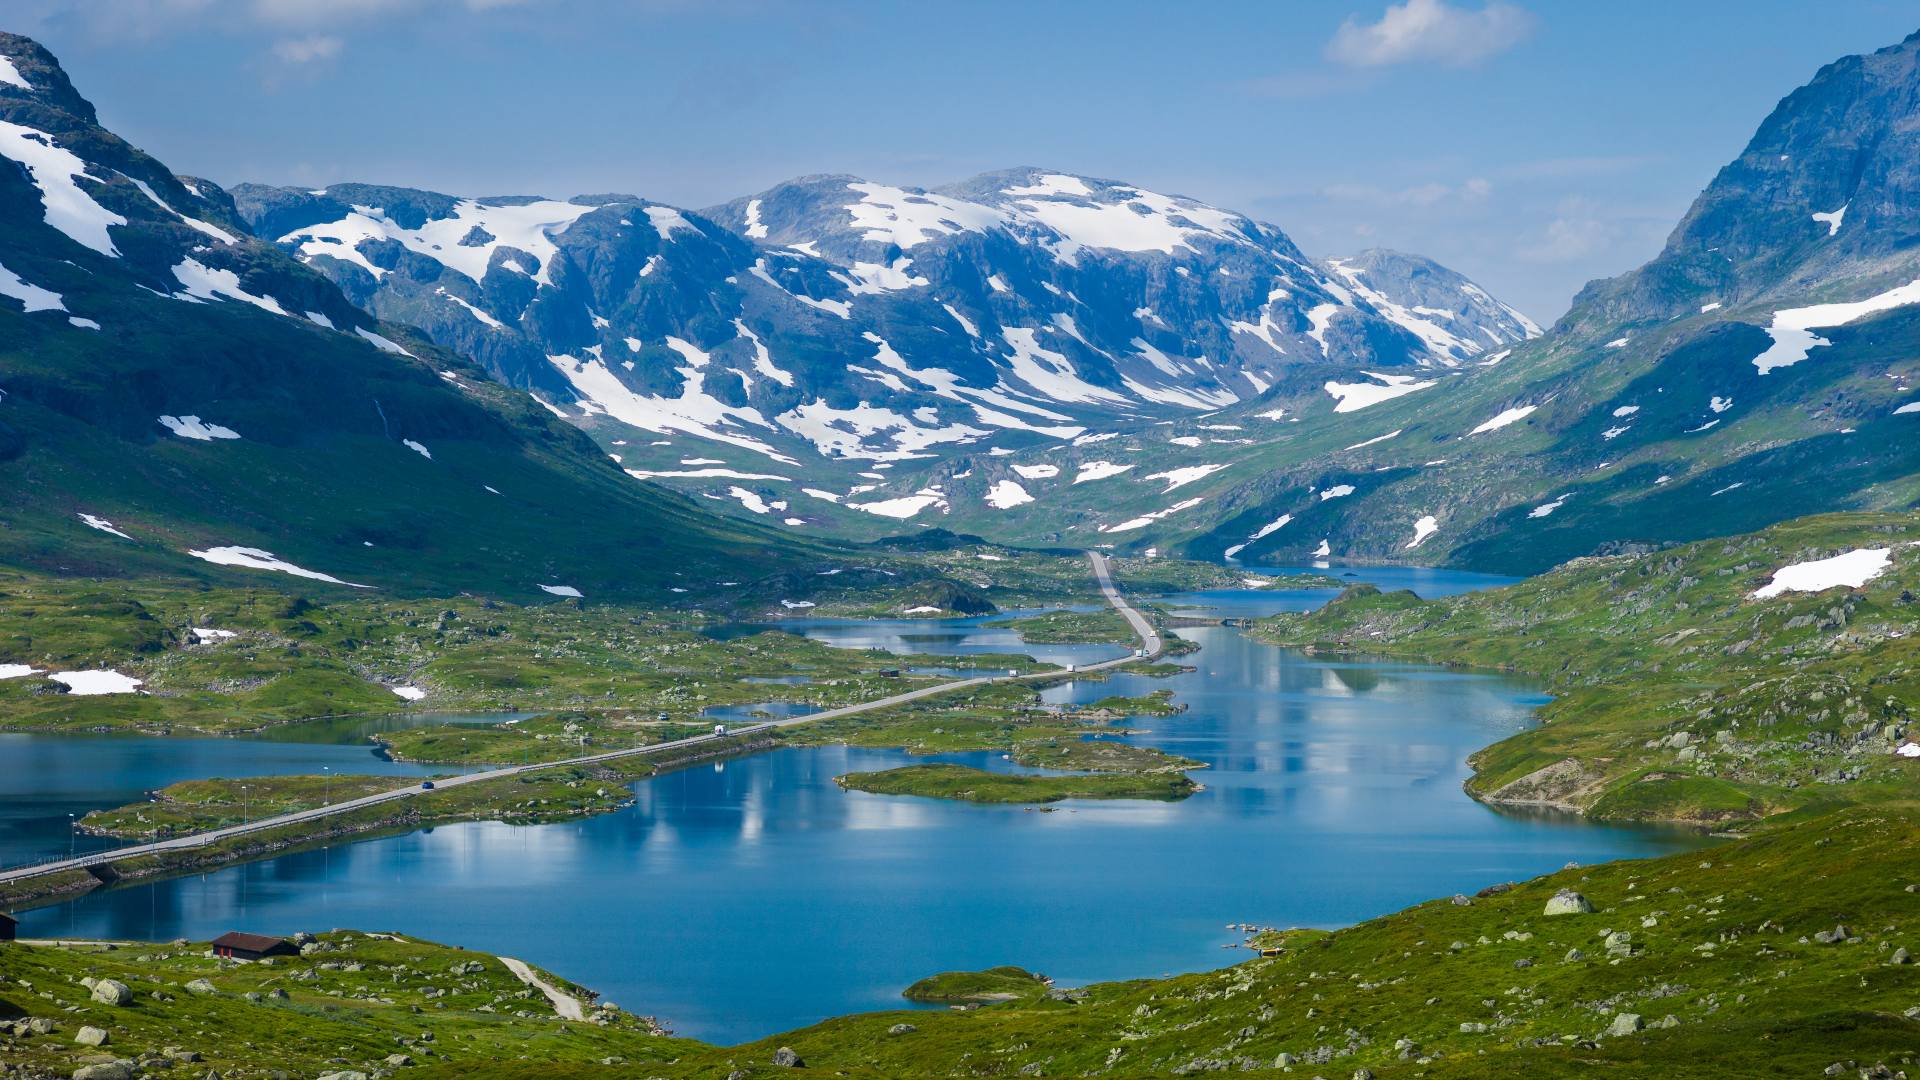  Haukelifjellroad in Norway passing over a lake in an alpine scene